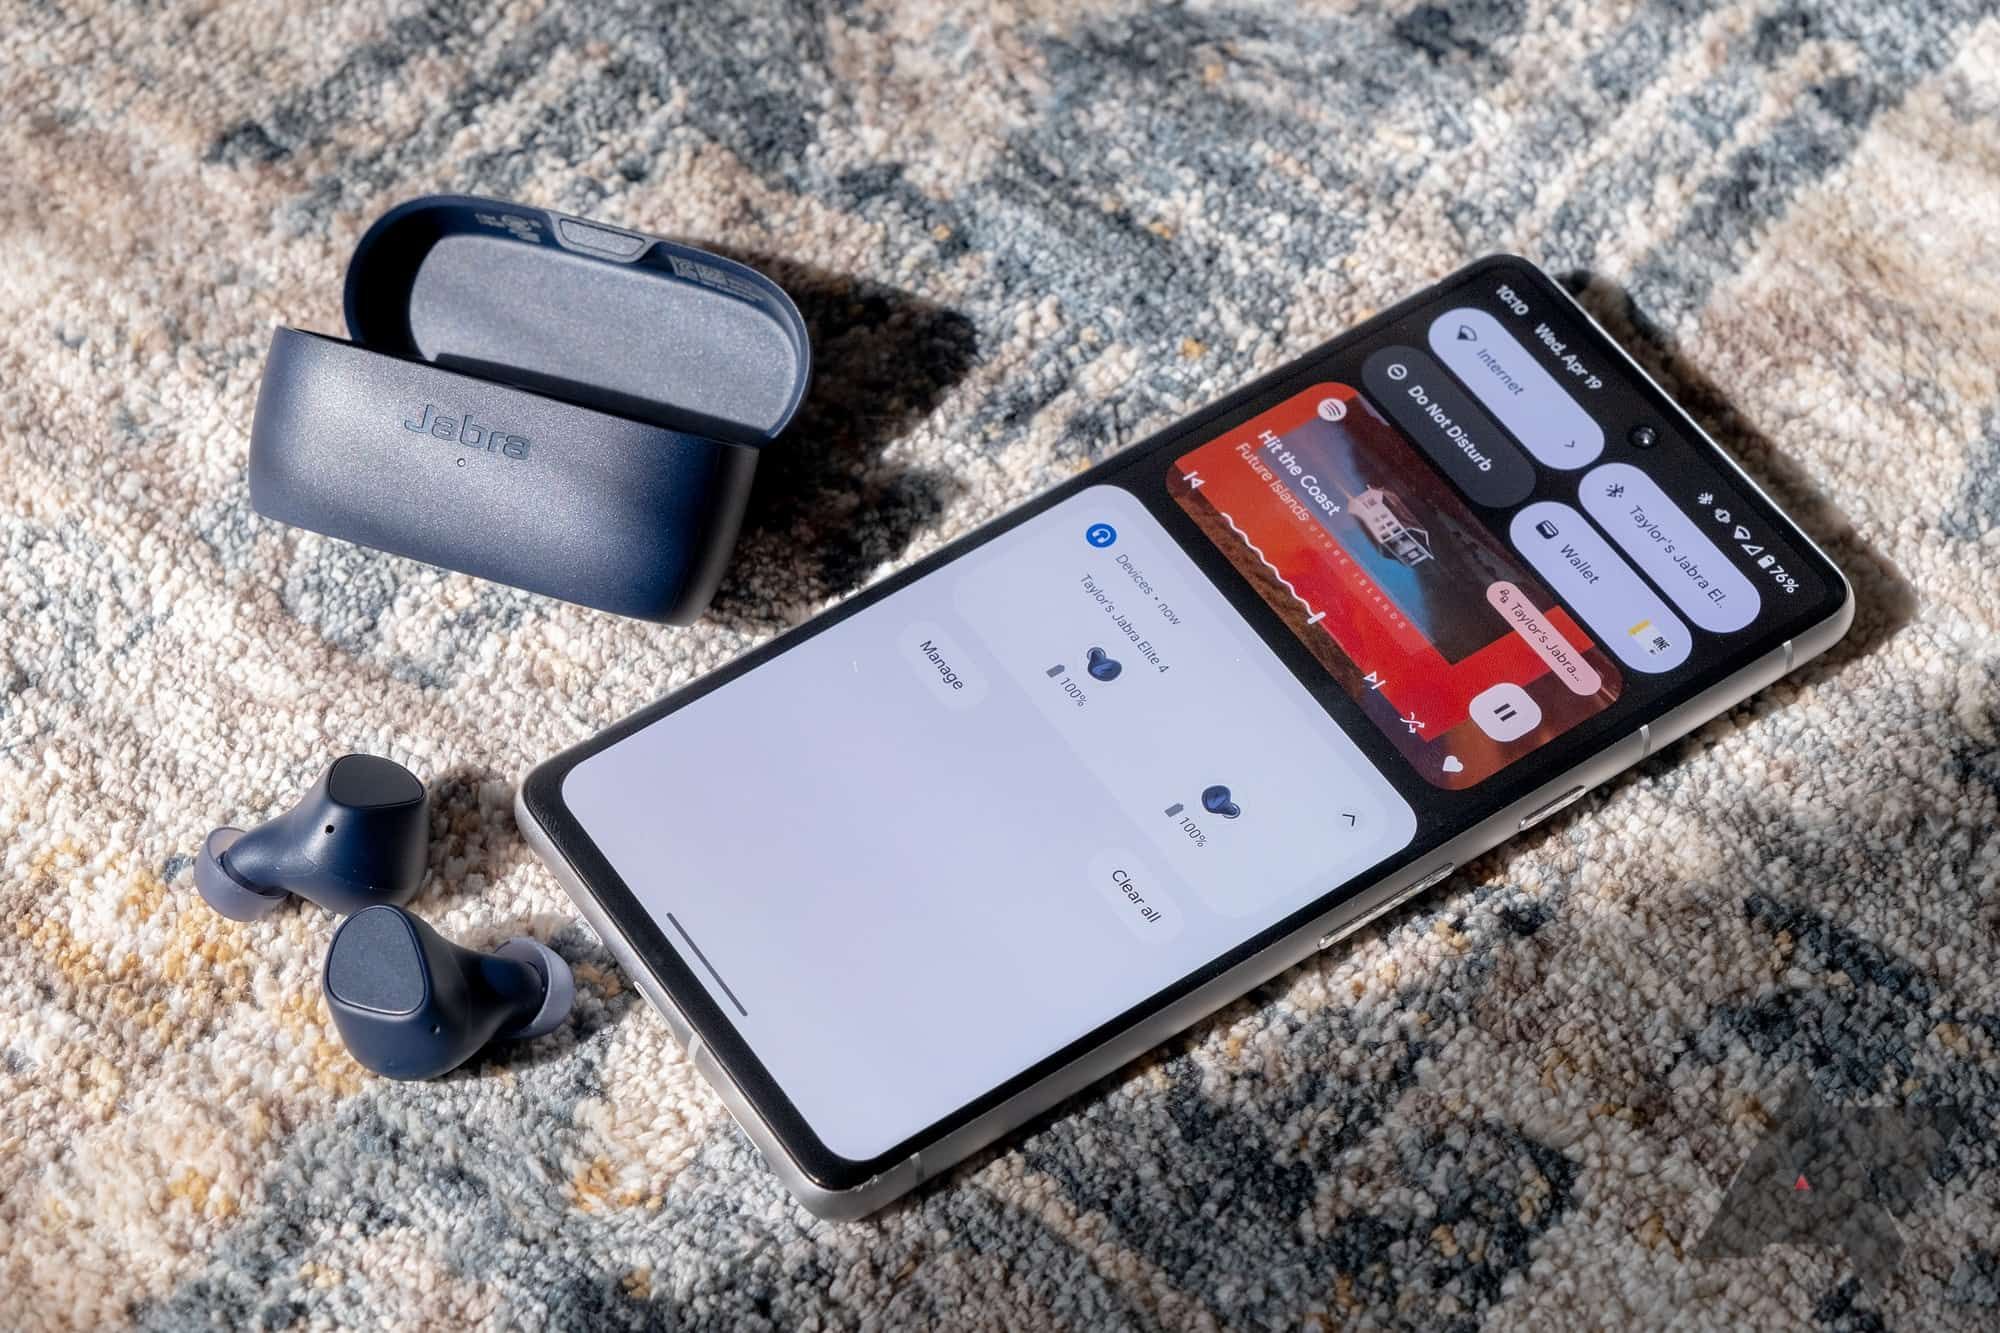 A pair of Jabra earbuds that has been paired with a smartphone